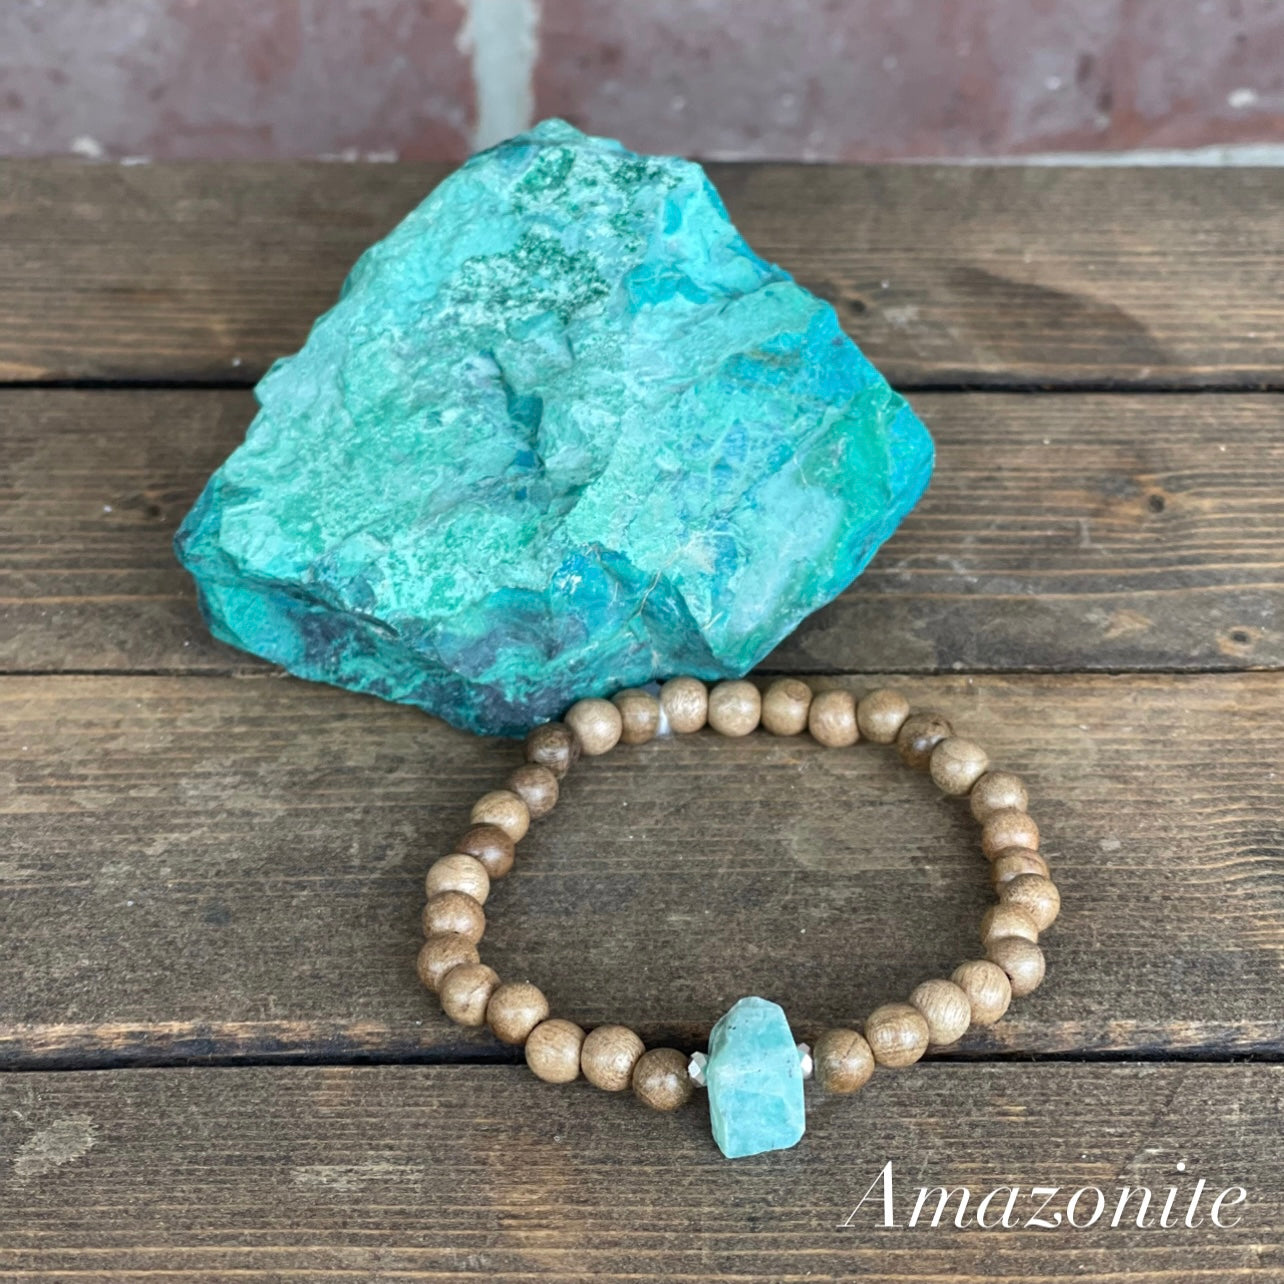 Raw Beauty Bracelets for Littles made with Raw Gemstones - Amazonite